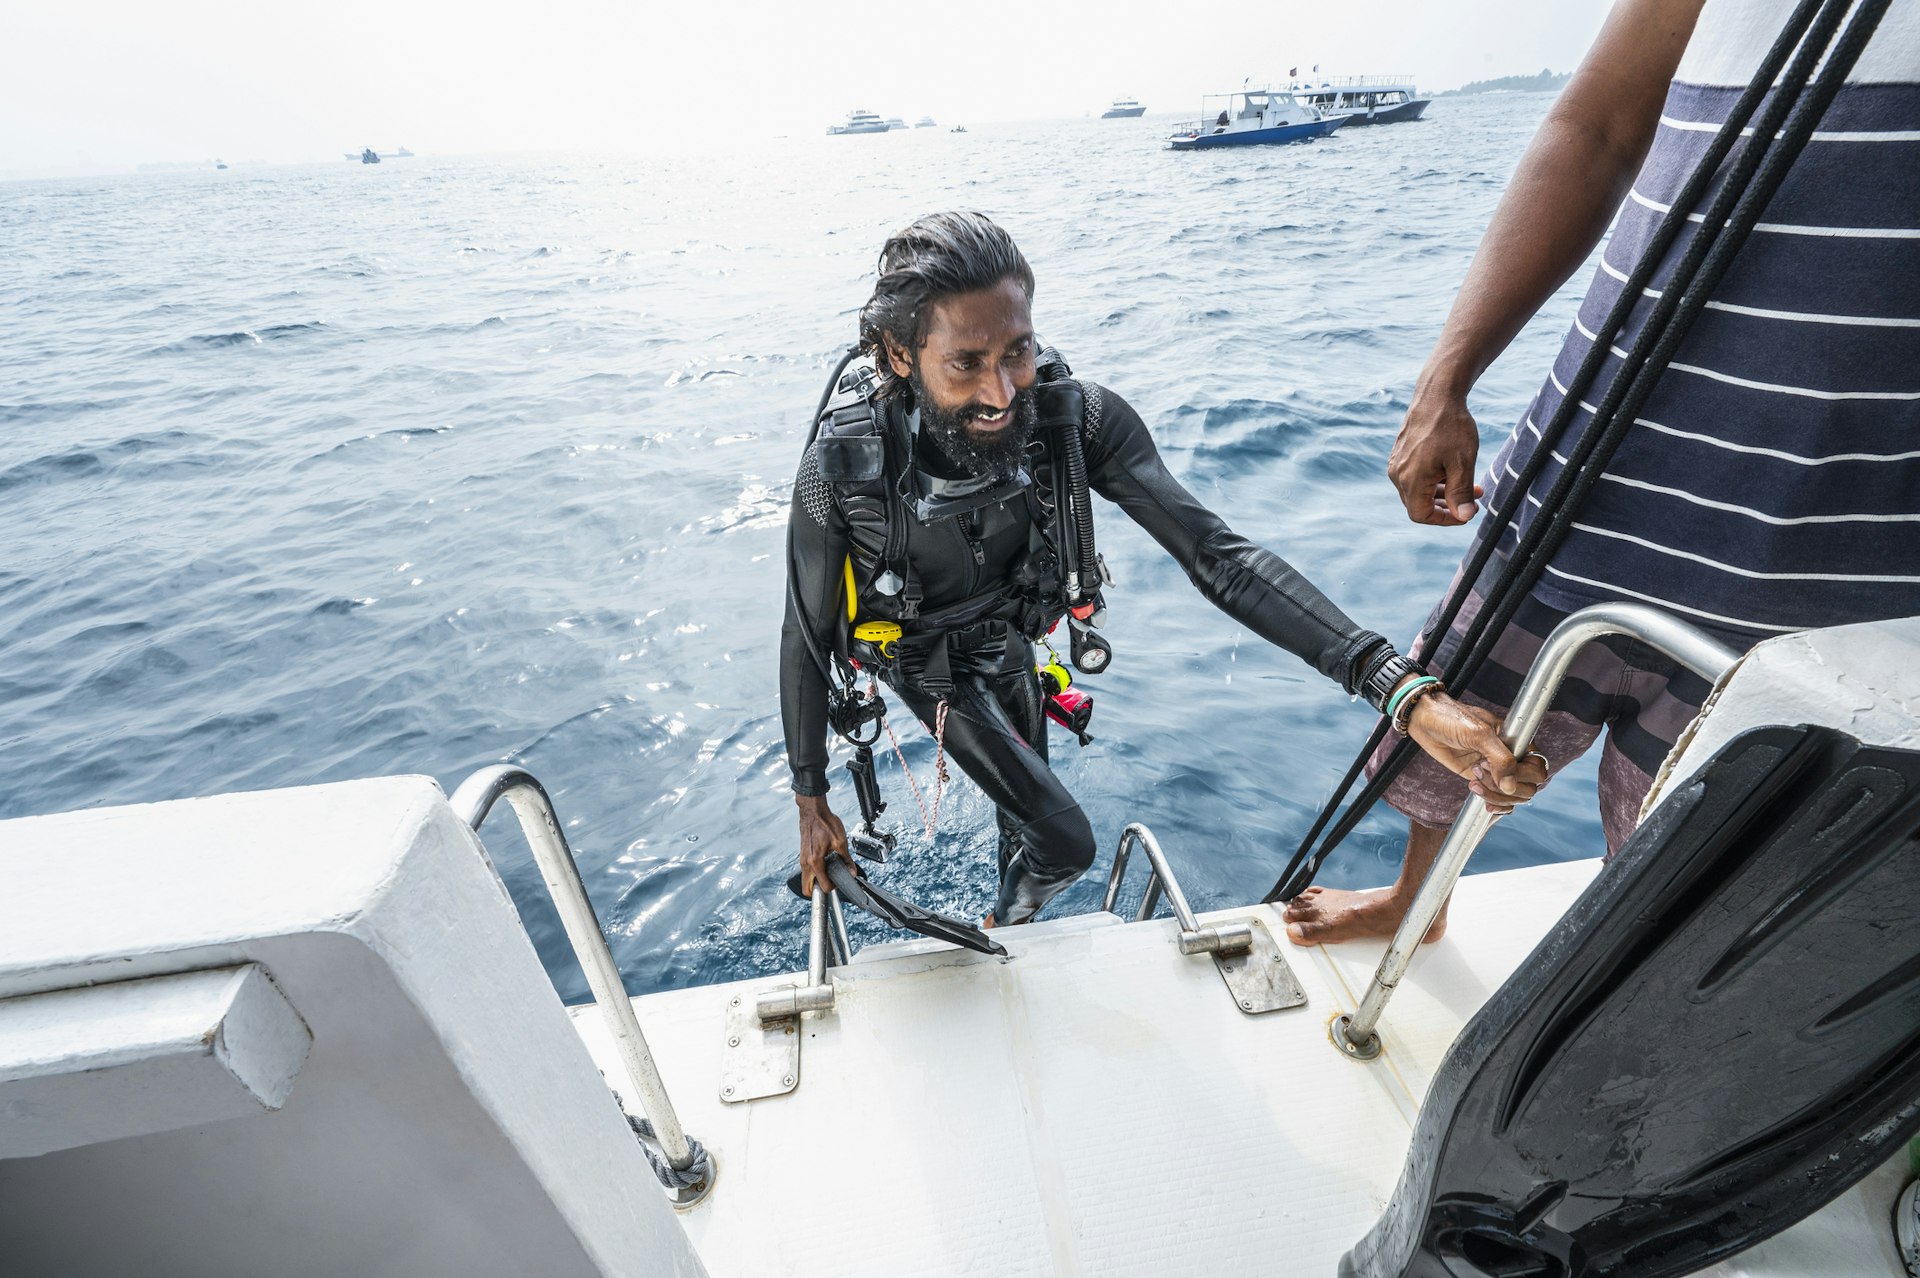 A diver clambers back into a boat after a dive in the ocean